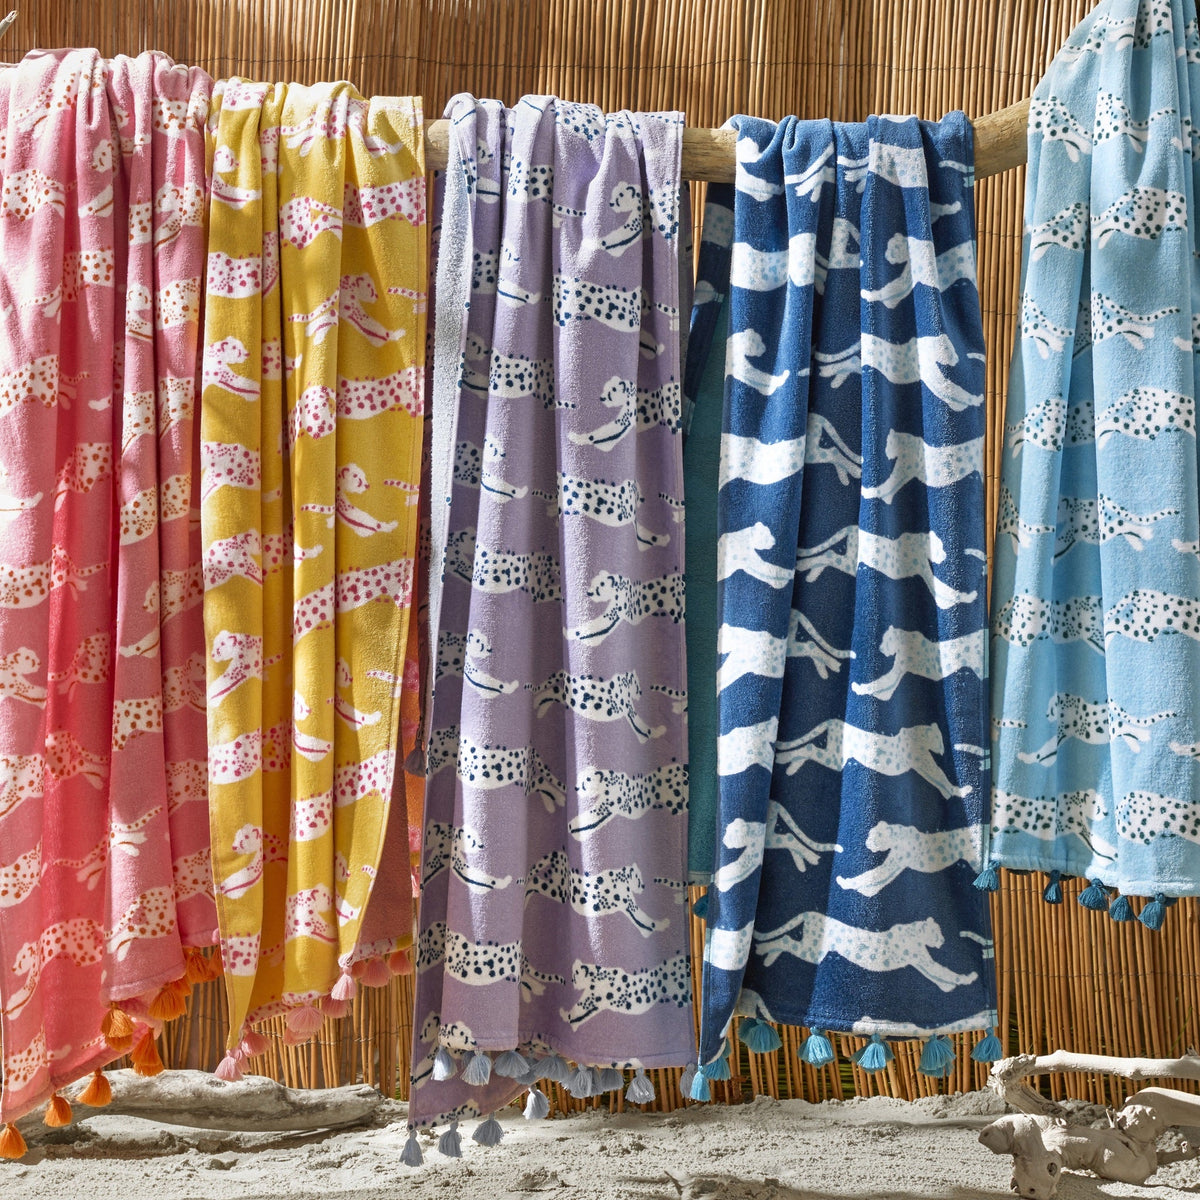 Matouk Leaping Leopard Beach Towels Hanging on a Branch in Different Colors